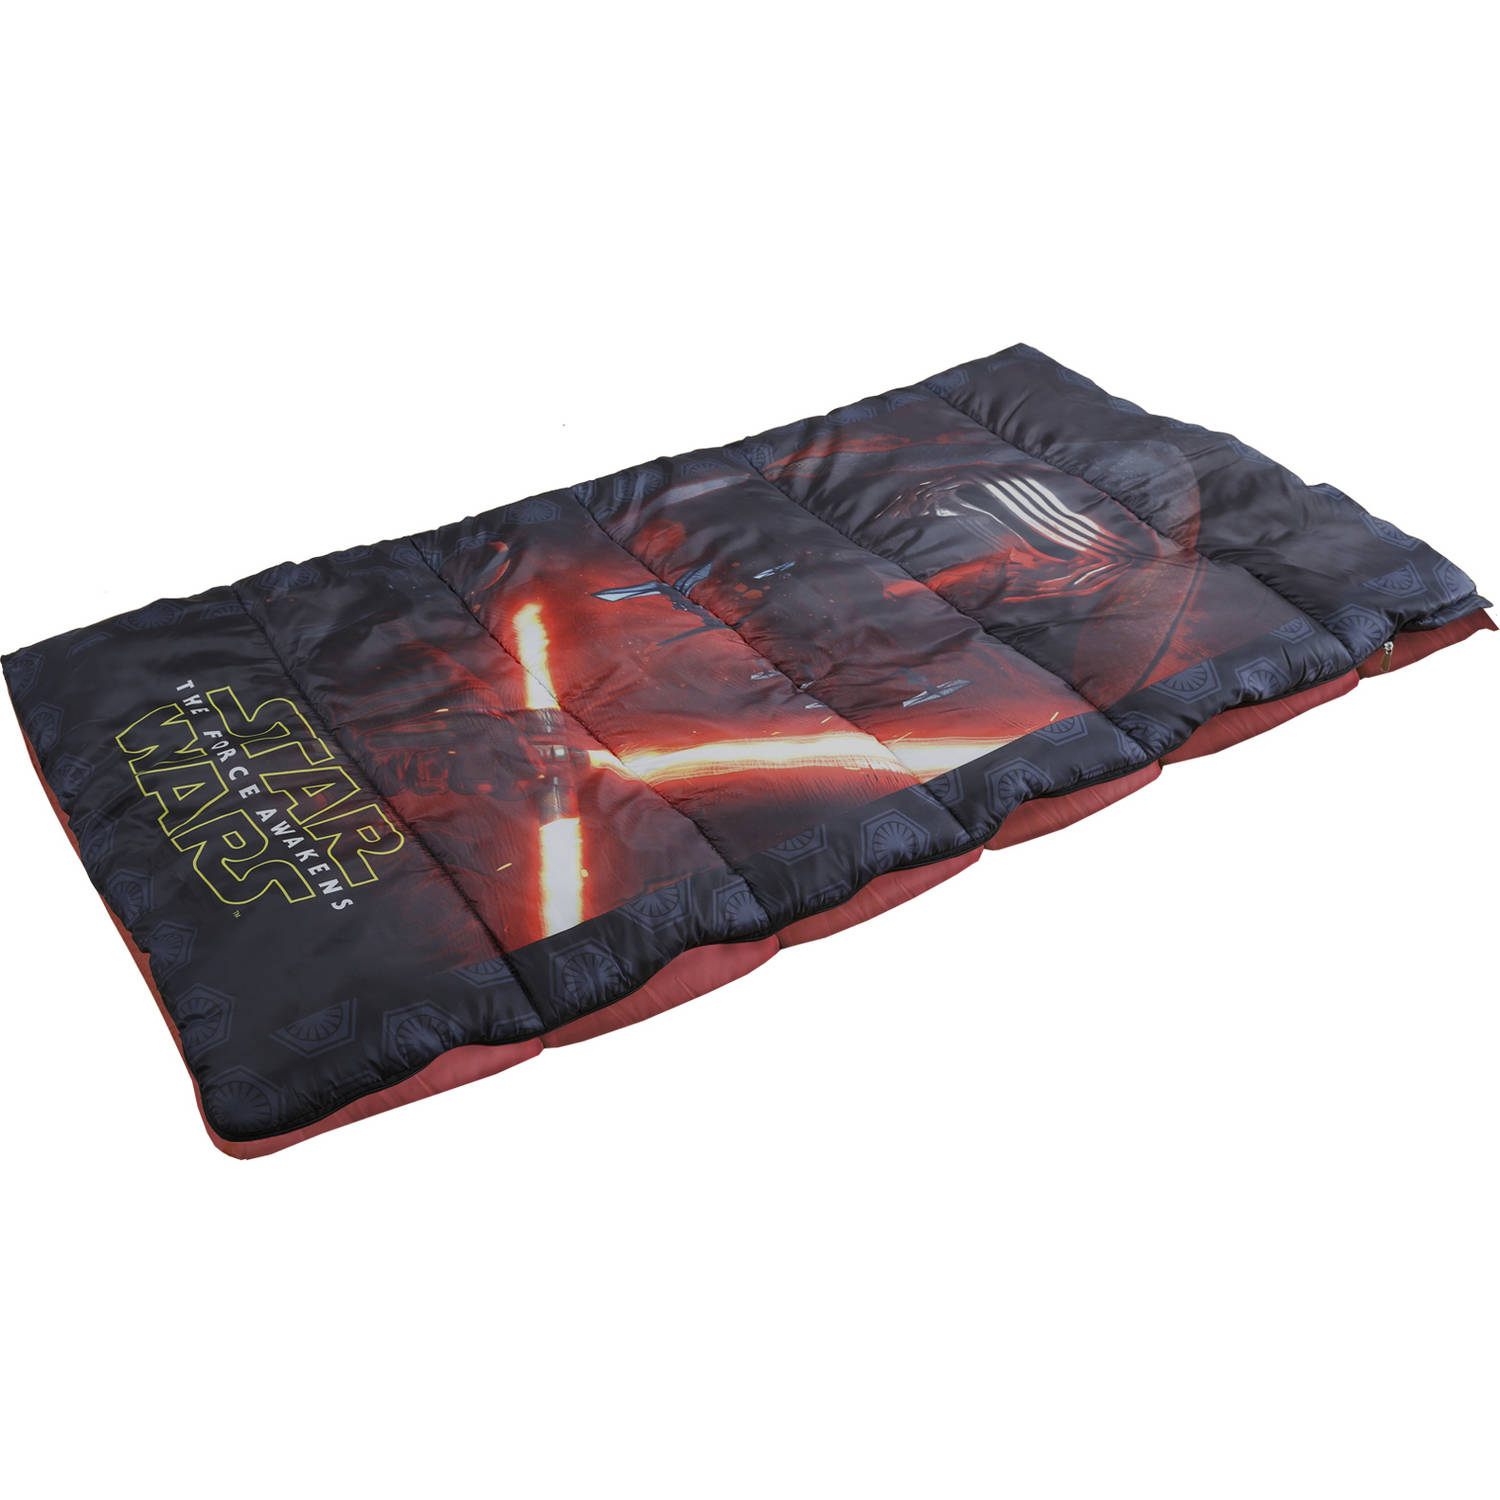 Star Wars 28" x 56" Sleeping Bag with Polyester Outer Shell and Liner - image 1 of 1